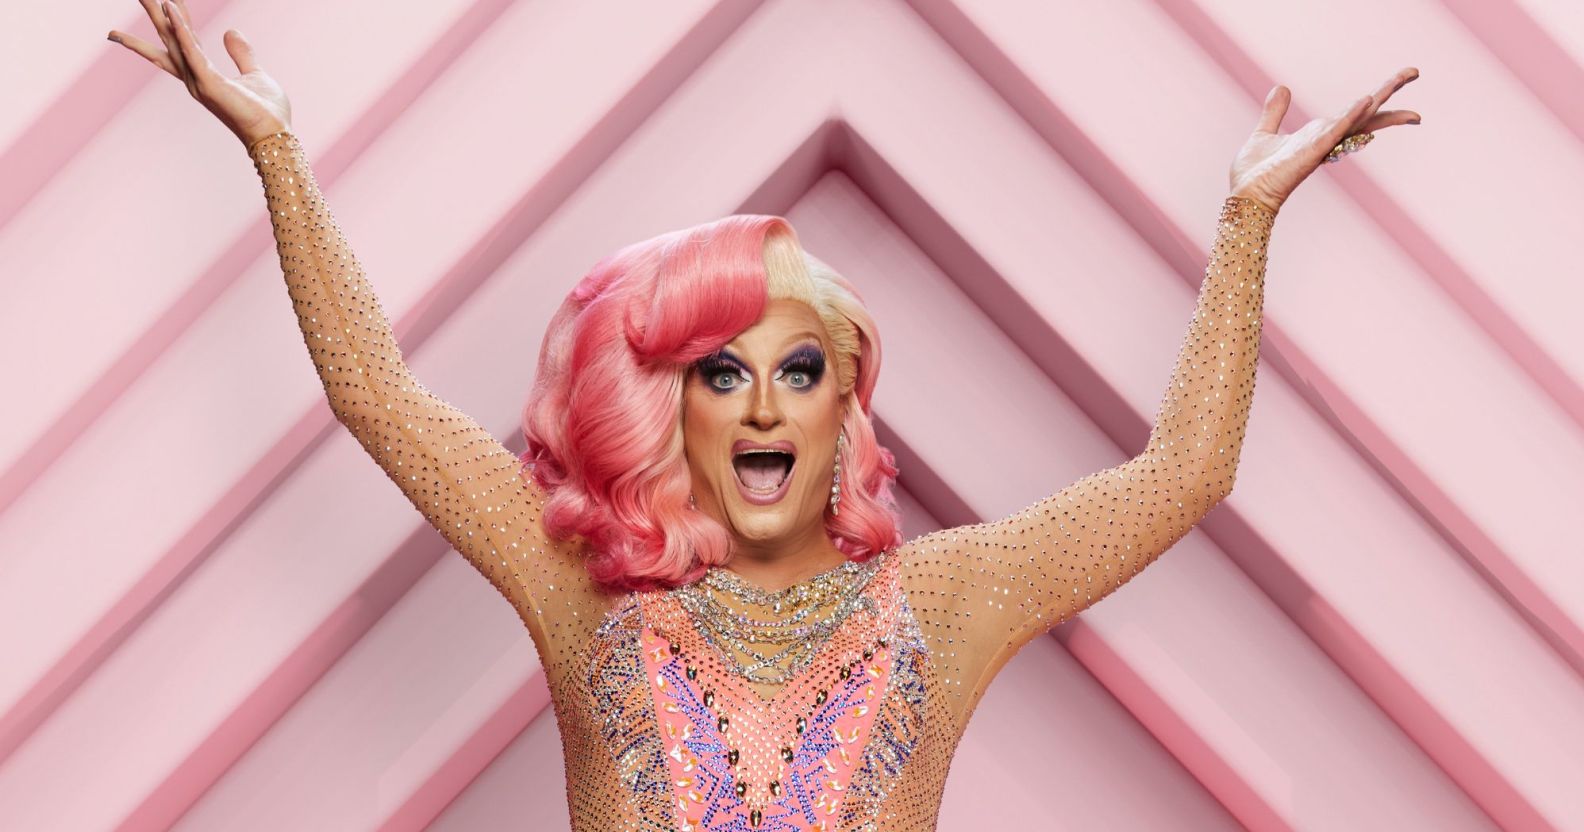 Drag queen Panti Bliss wears a pink and patterned dress with her hands raised in the air. She has pink hair on the left side and blonde on the right. She is standing against a pink patterned background in a promotional shot for the RTÉ show Dancing with the Stars.